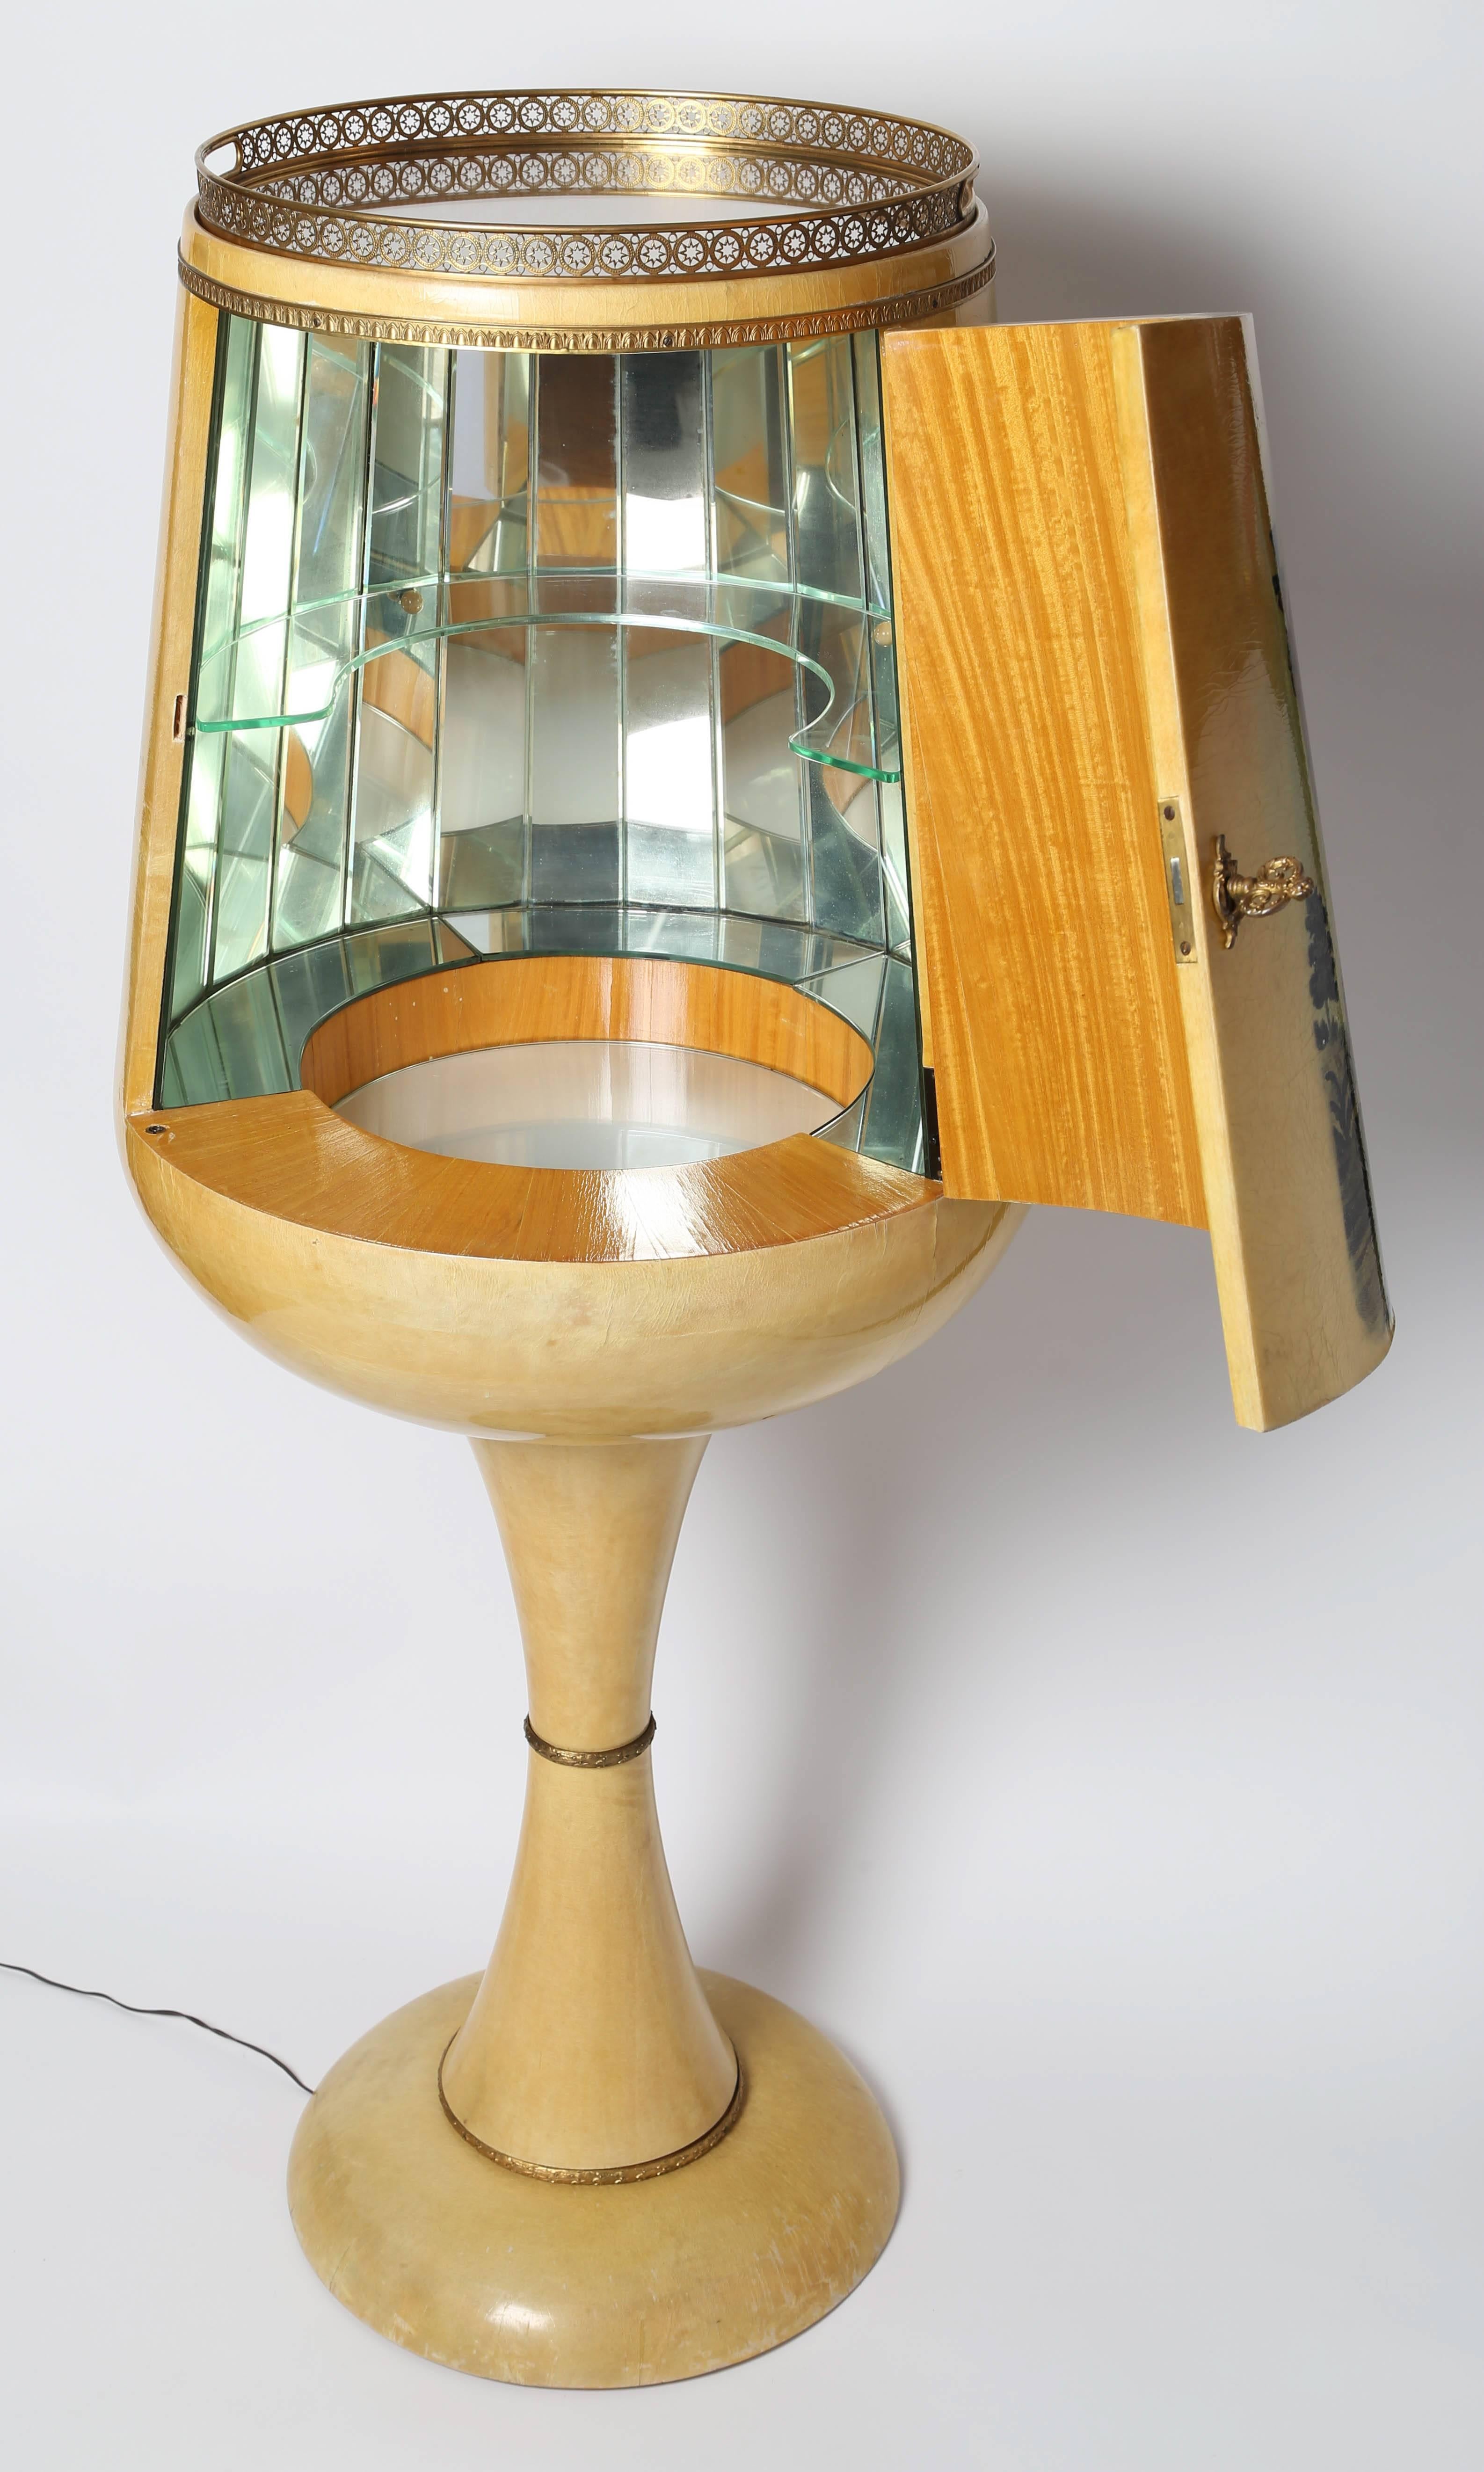 Whimsical 1950s Aldo Tura dry bar shaped like a goblet opens to reveal a faceted, mirrored interior, a single glass shelf and an illuminated frosted-glass bottom. Beautifully made with ornate solid-brass trim, hinges, original key and removable